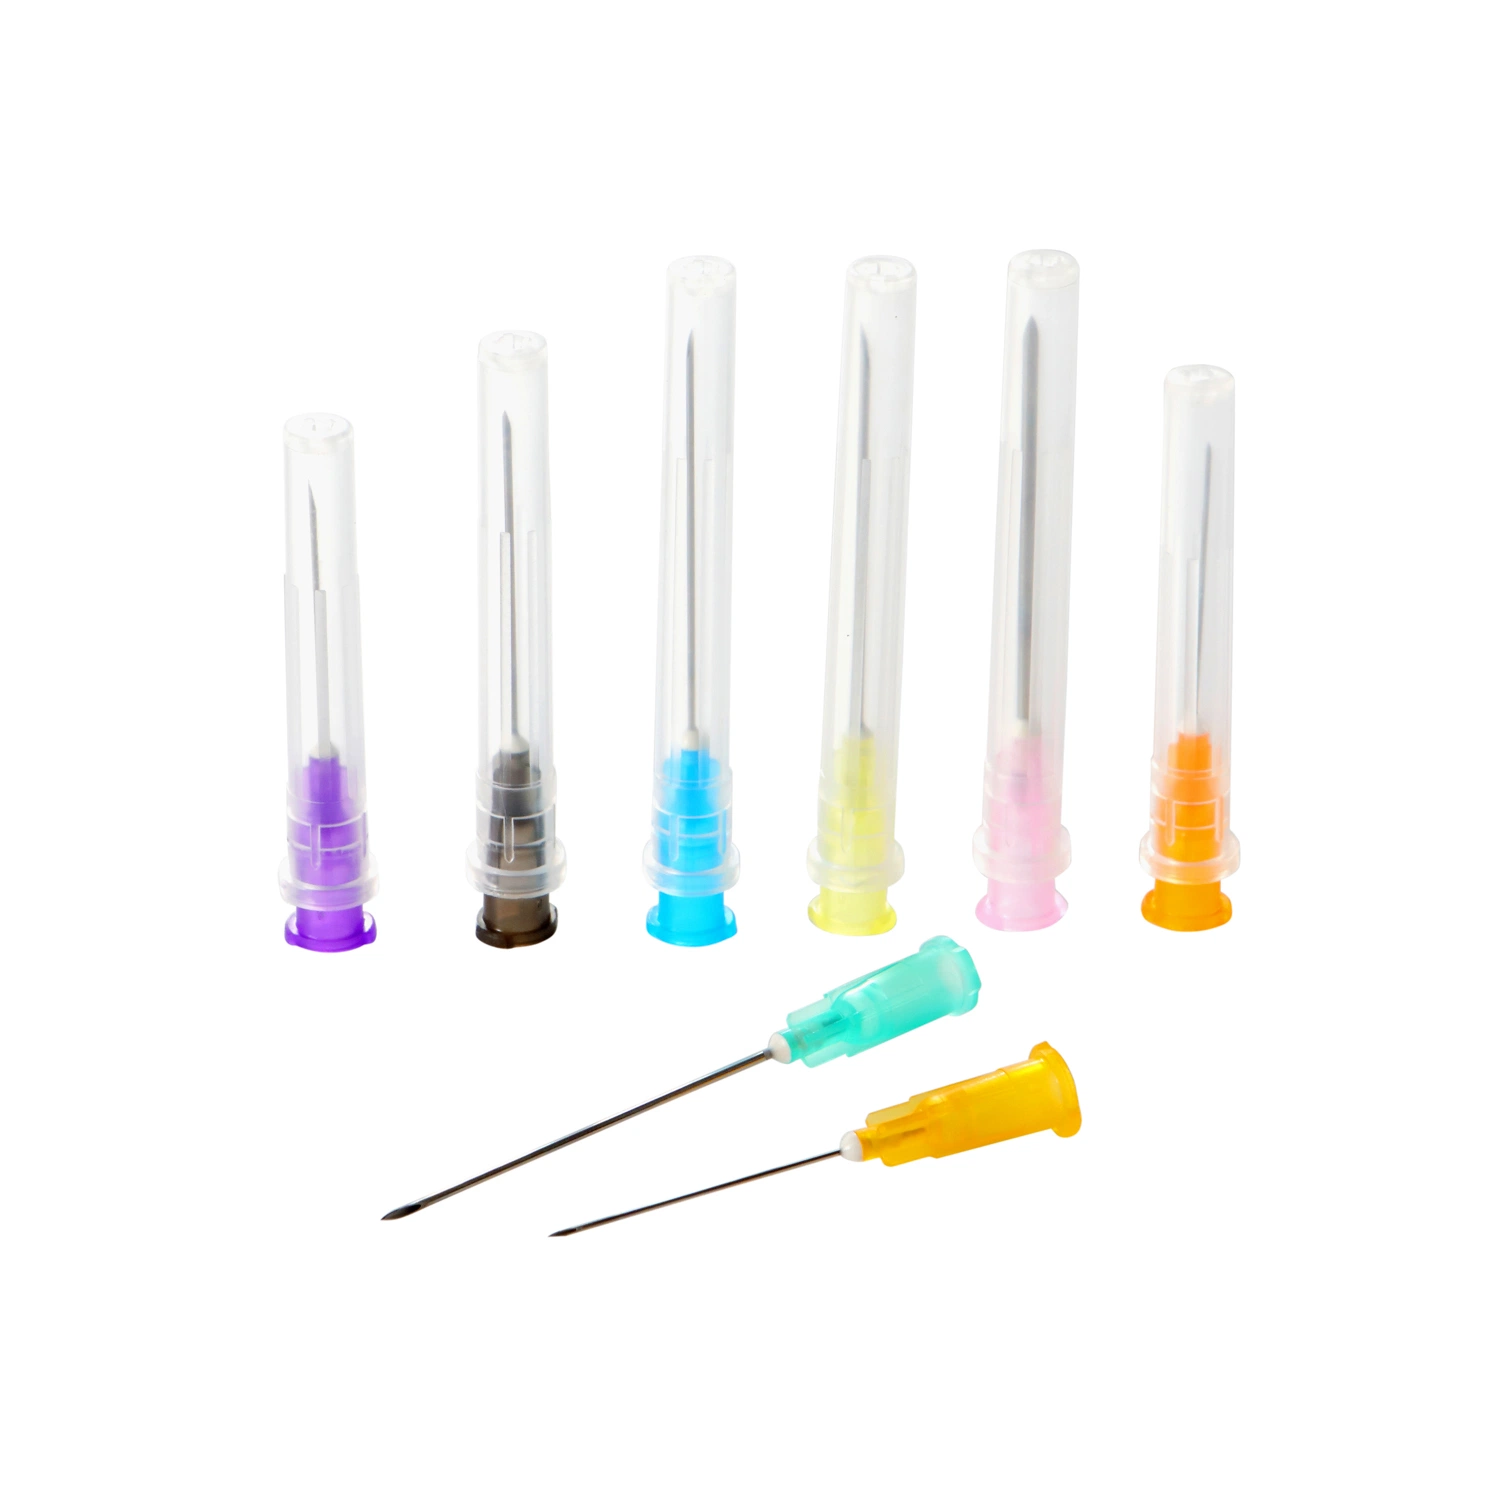 Disposable Medical Sterile Insulin Hypodermic Syringe Needle Sterile with CE